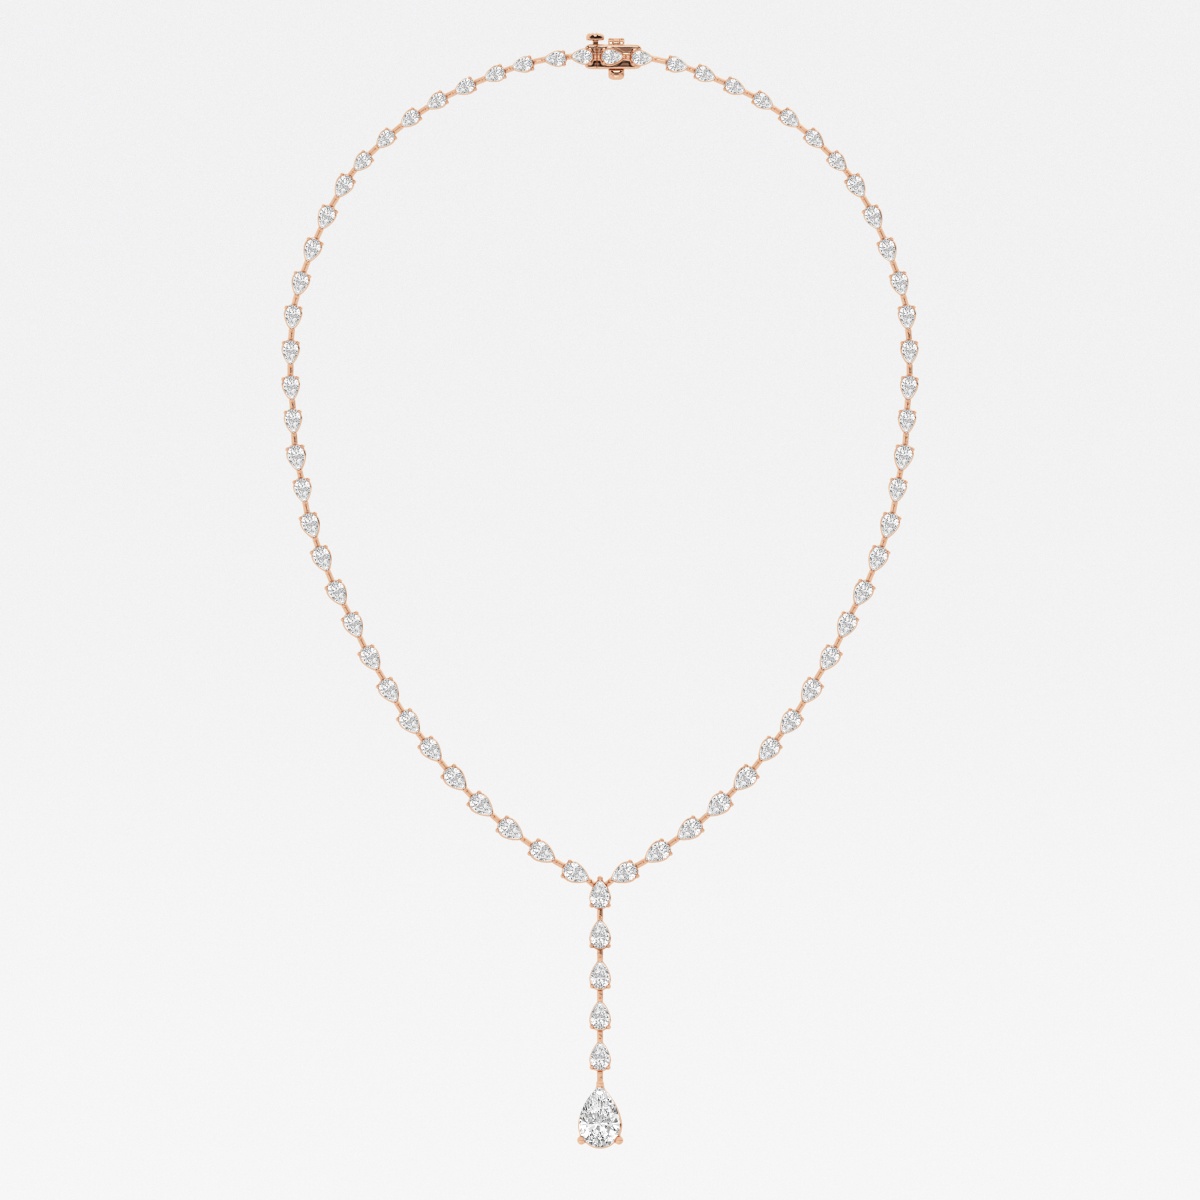 Additional Image 1 for  Badgley Mischka 17 ctw Pear Lab Grown Diamond Lariat Tennis Necklace